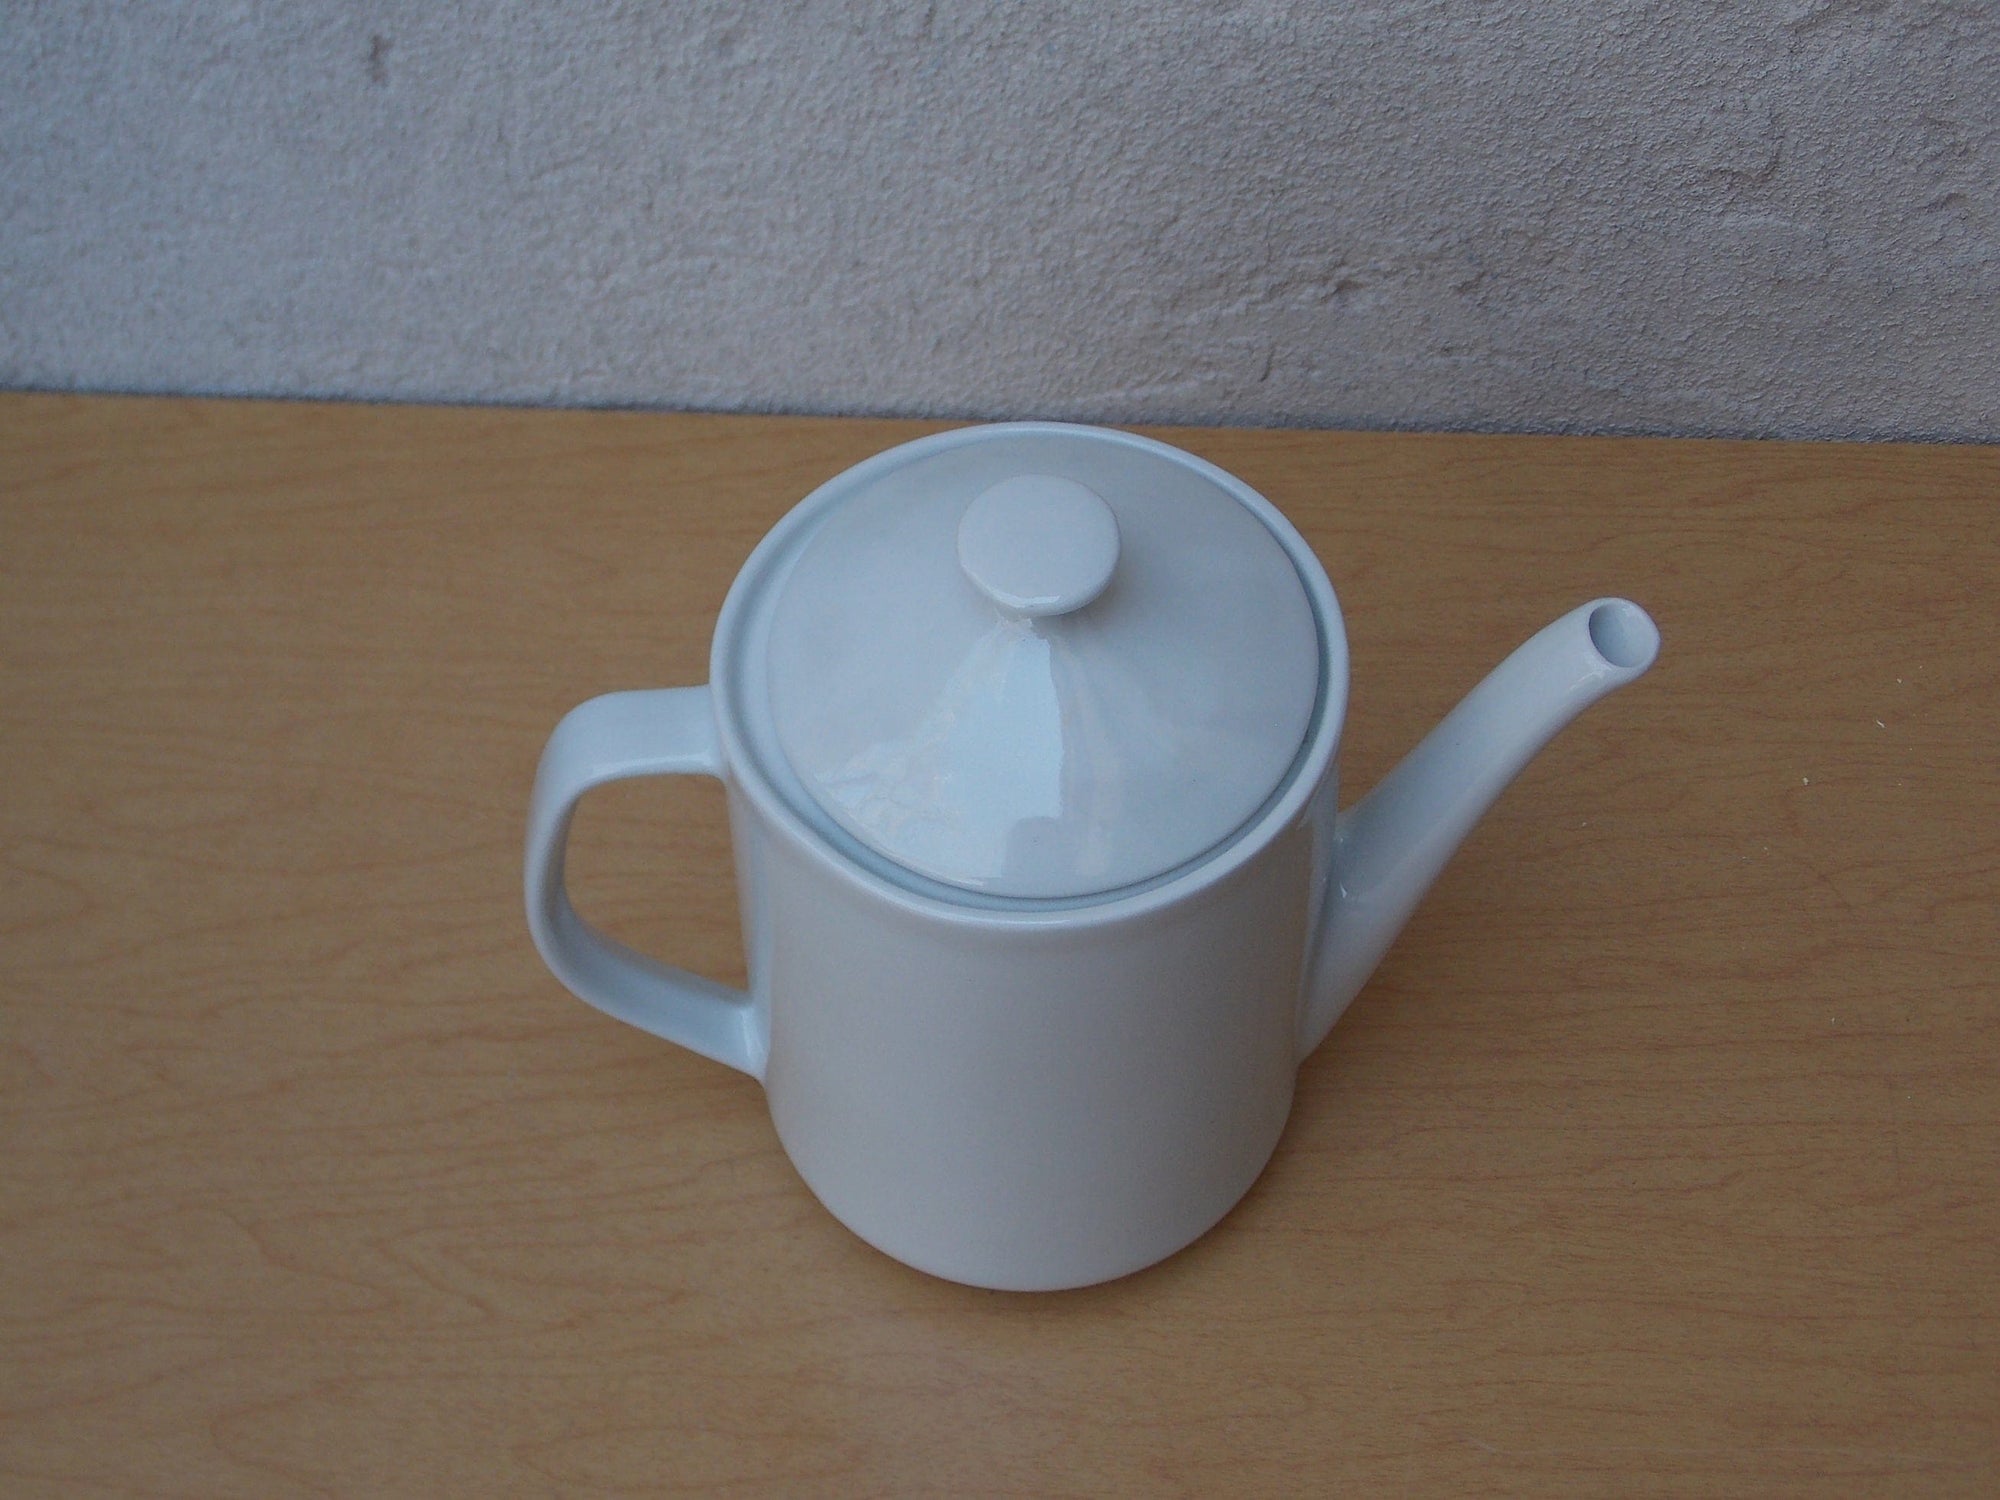 I Like Mike's Mid Century Modern Accessories Simple White Tall Modern Ceramic Teapot or Coffee Pot, Made in Brazil